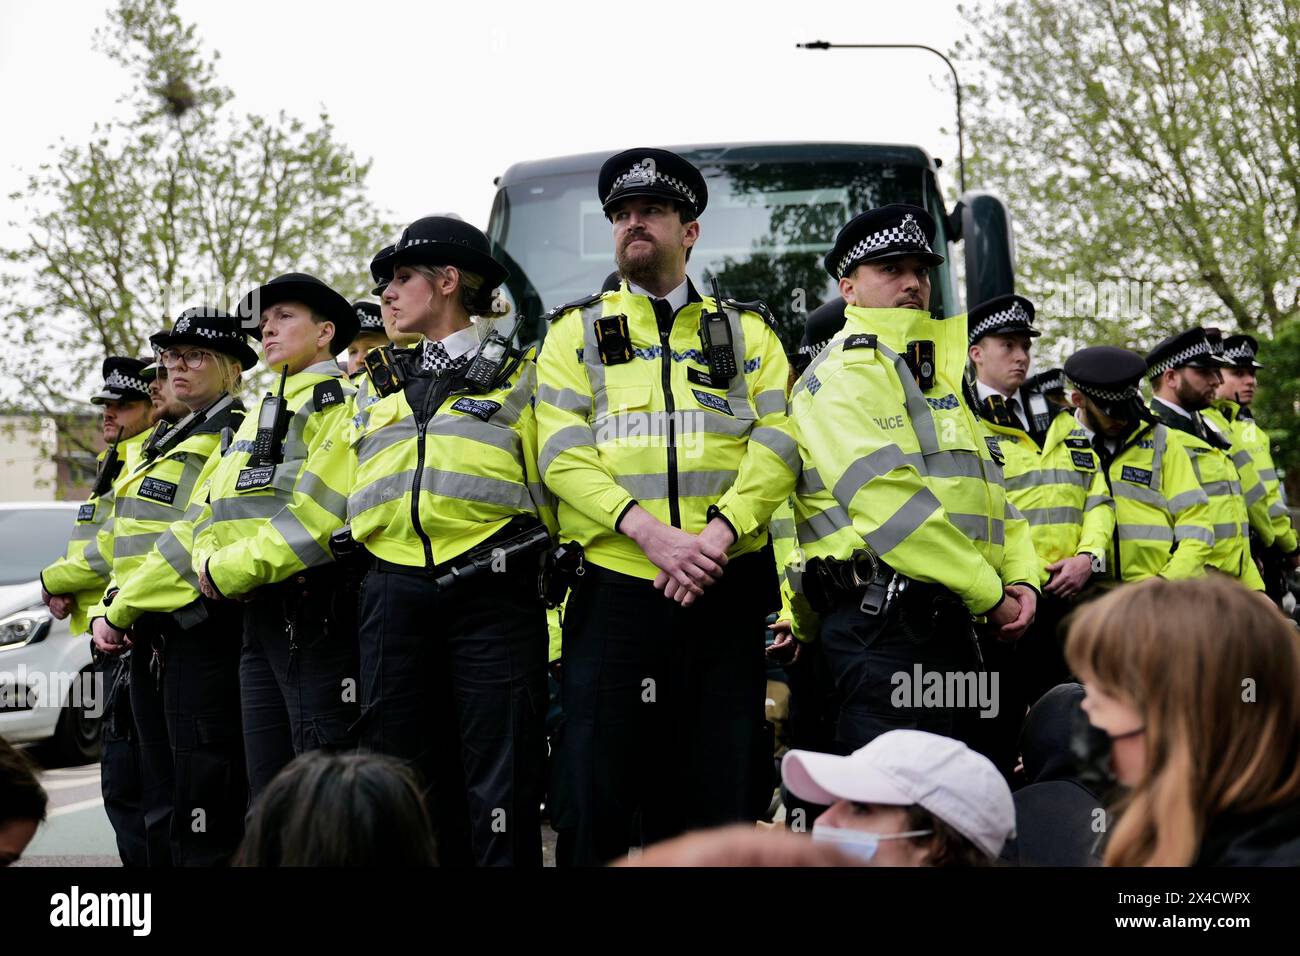 London / UK. 02 May 2024. Protestors block Peckham High street outside Great Western Hotel to prevent the removal of refugees to the Bibby Stockholm barge. Alamy Live News / Aubrey Fagon Stock Photo